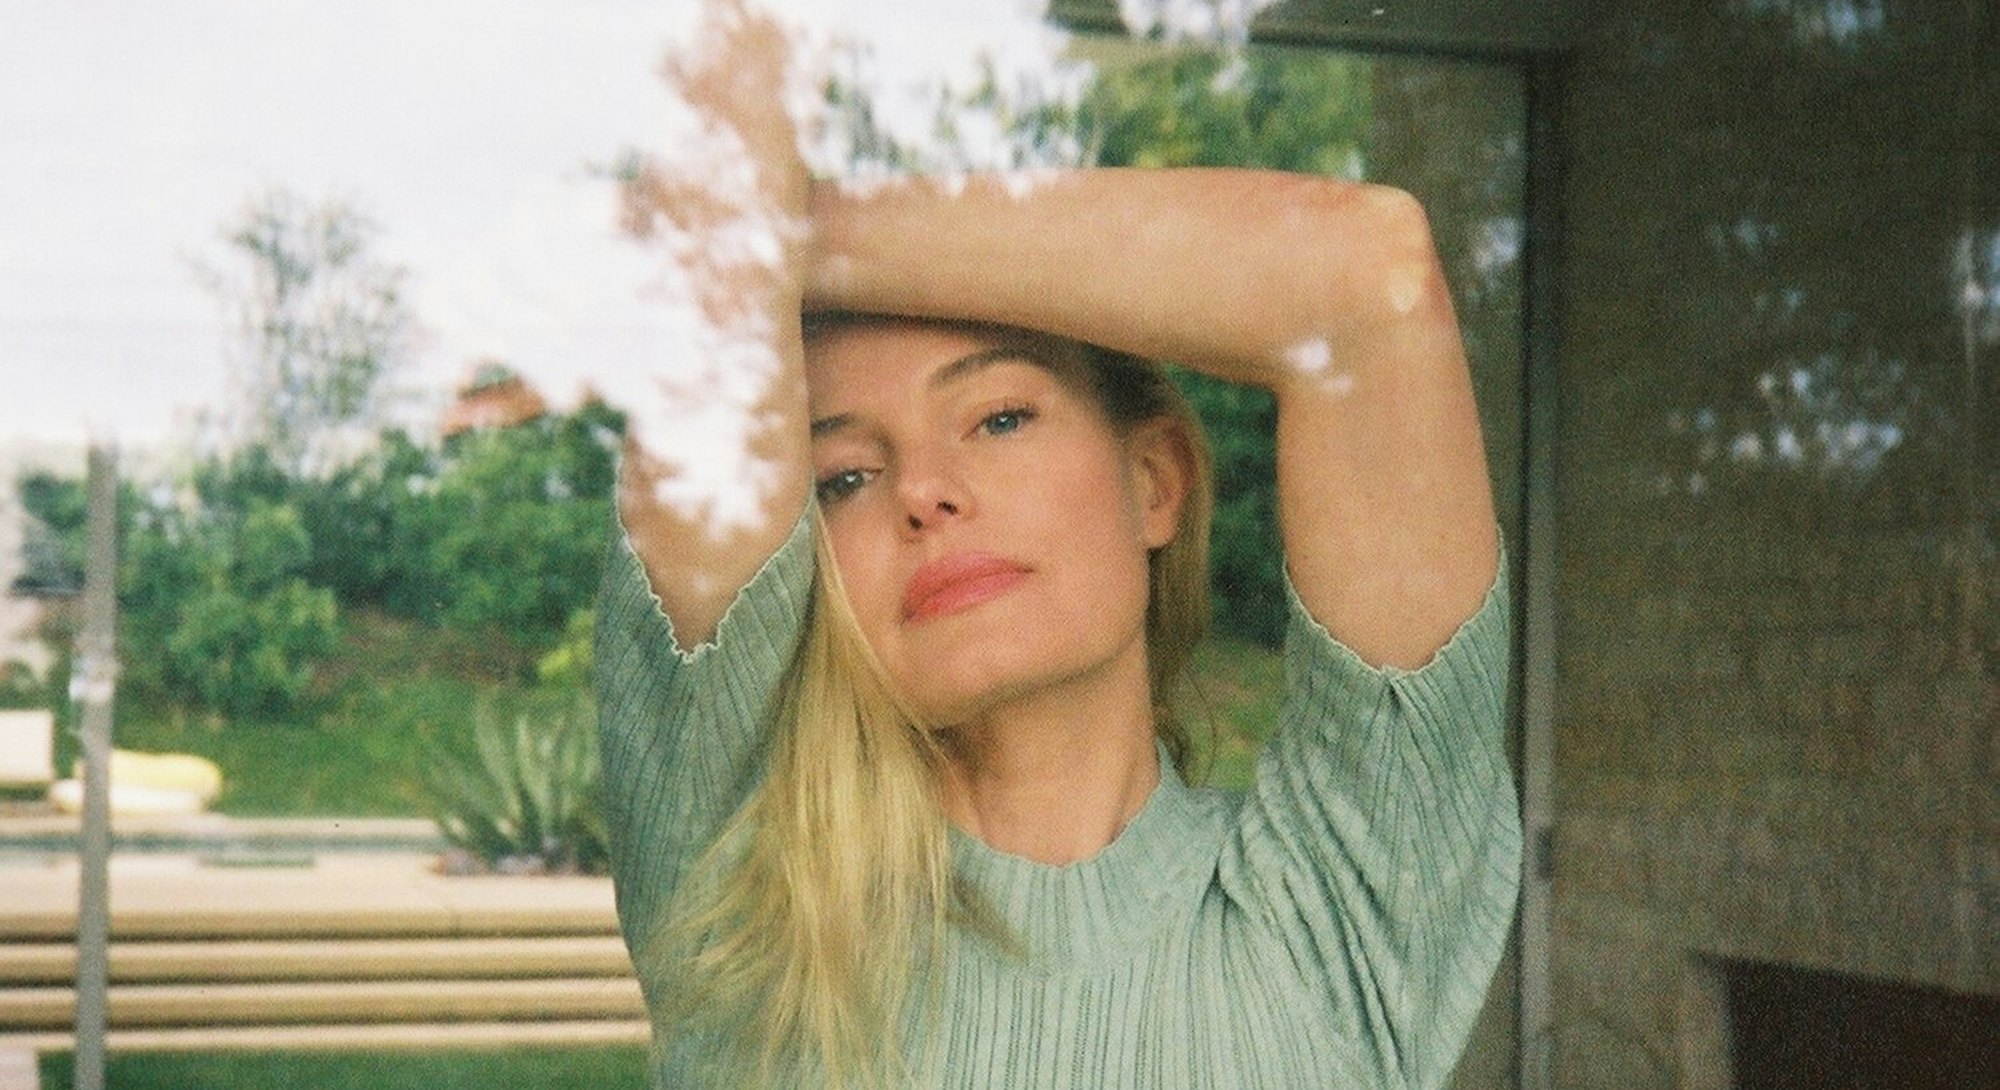 Kate Bosworth shot by a window during quarantine